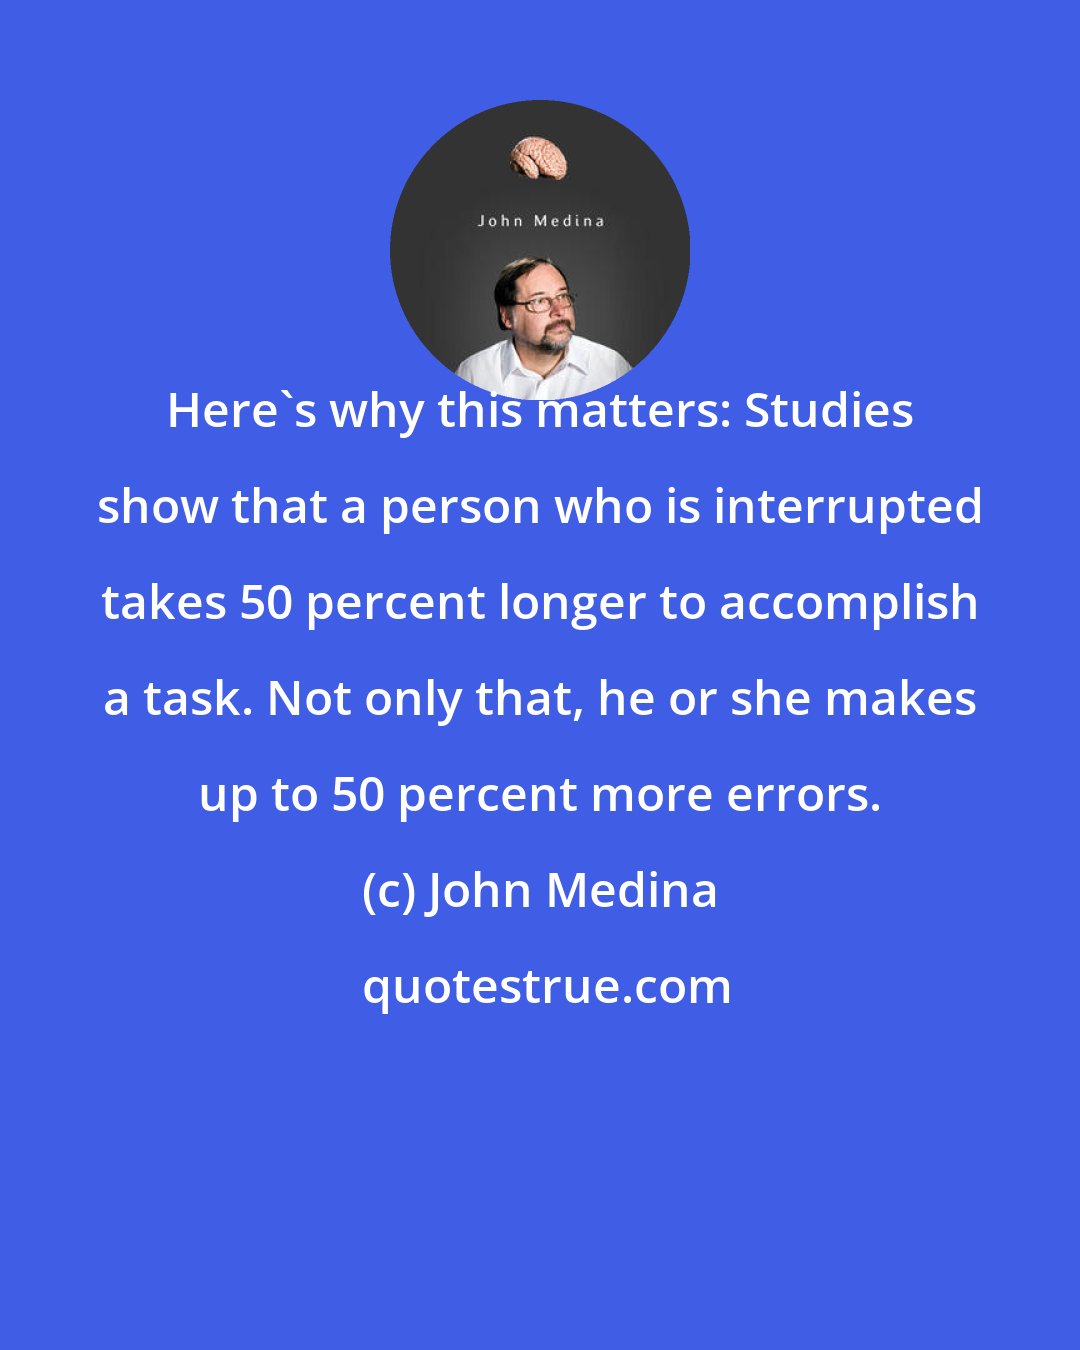 John Medina: Here's why this matters: Studies show that a person who is interrupted takes 50 percent longer to accomplish a task. Not only that, he or she makes up to 50 percent more errors.